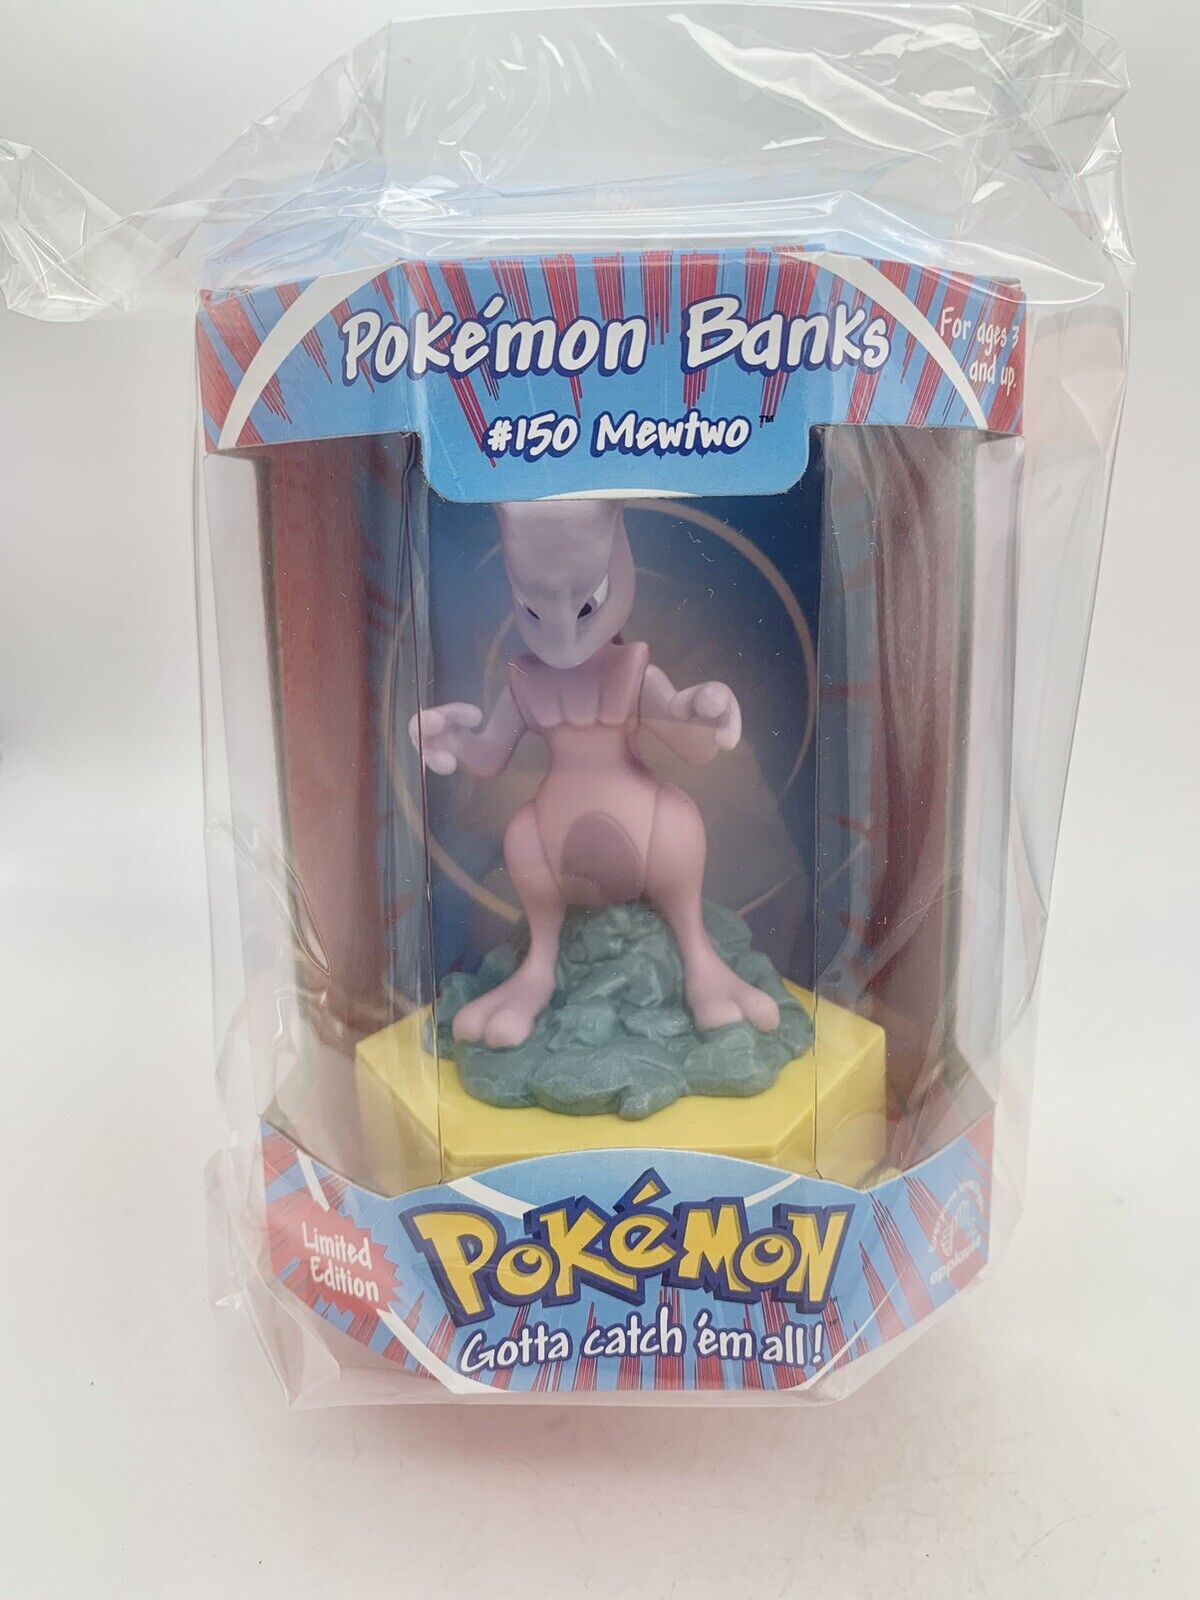 1998 APPLAUSE POKEMON BANKS #150 MEWTWO LIMITED EDITION BANK NEW SEALED